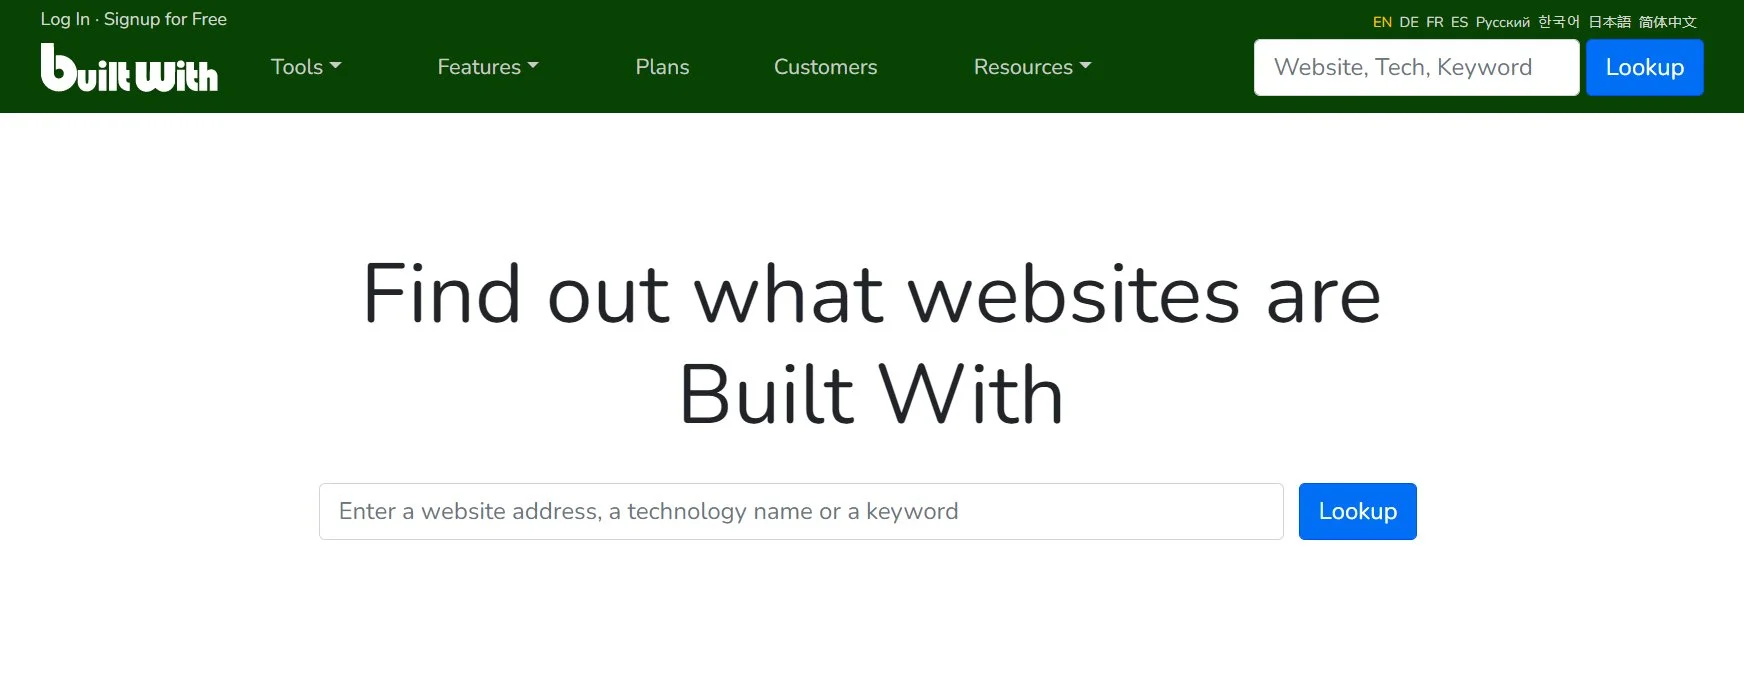 BuiltWith Review